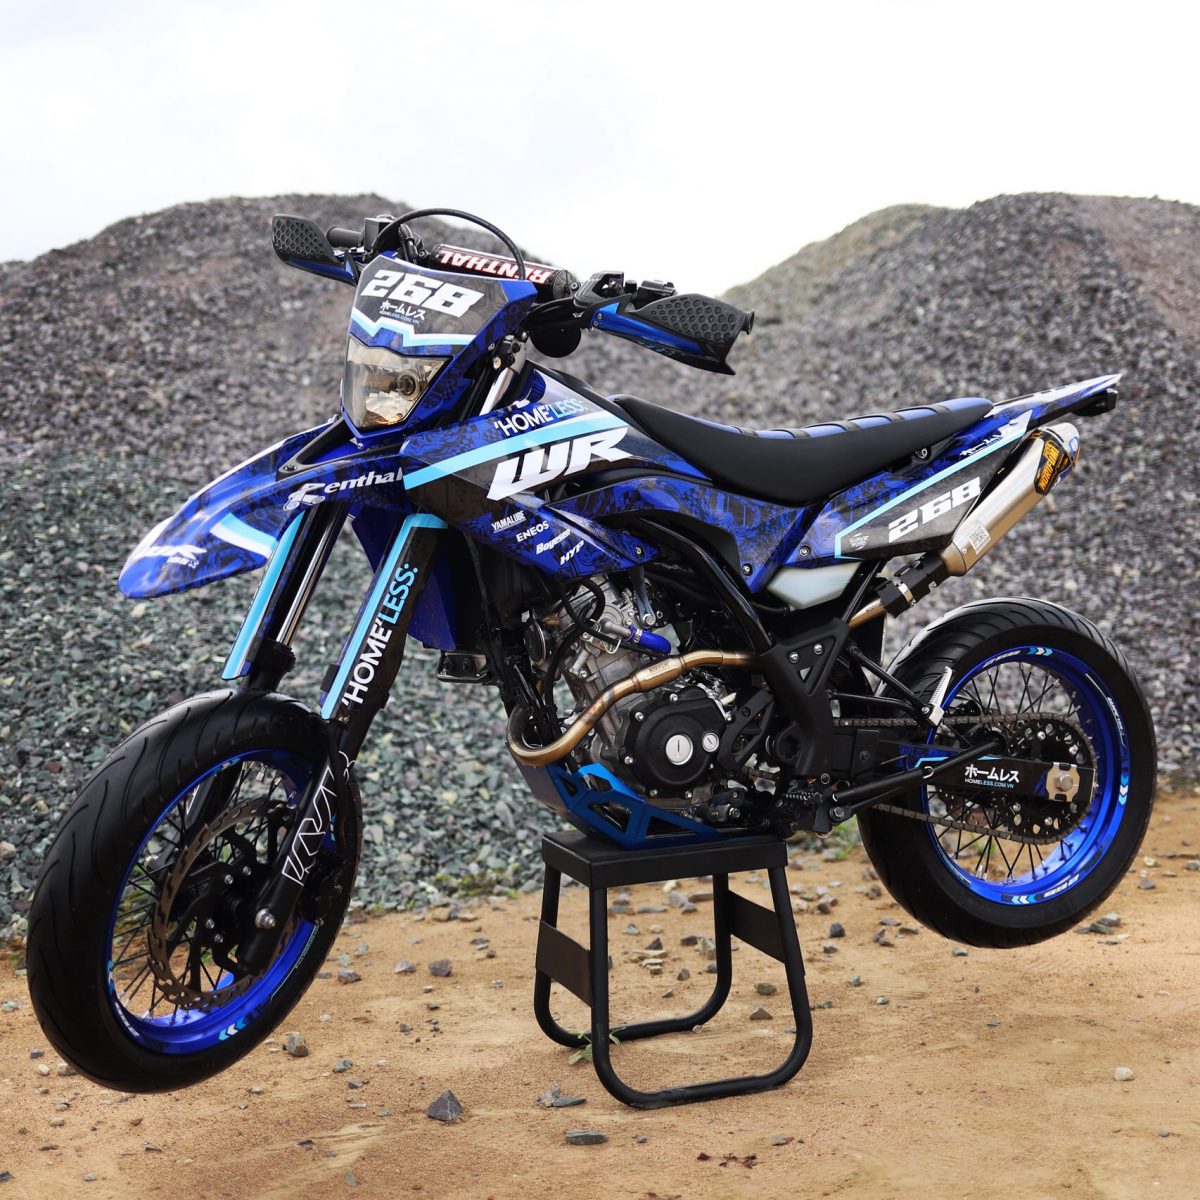 Used Yamaha WR155R bike for Sale in Singapore  Price Reviews  Contact  Seller  SGBikemart